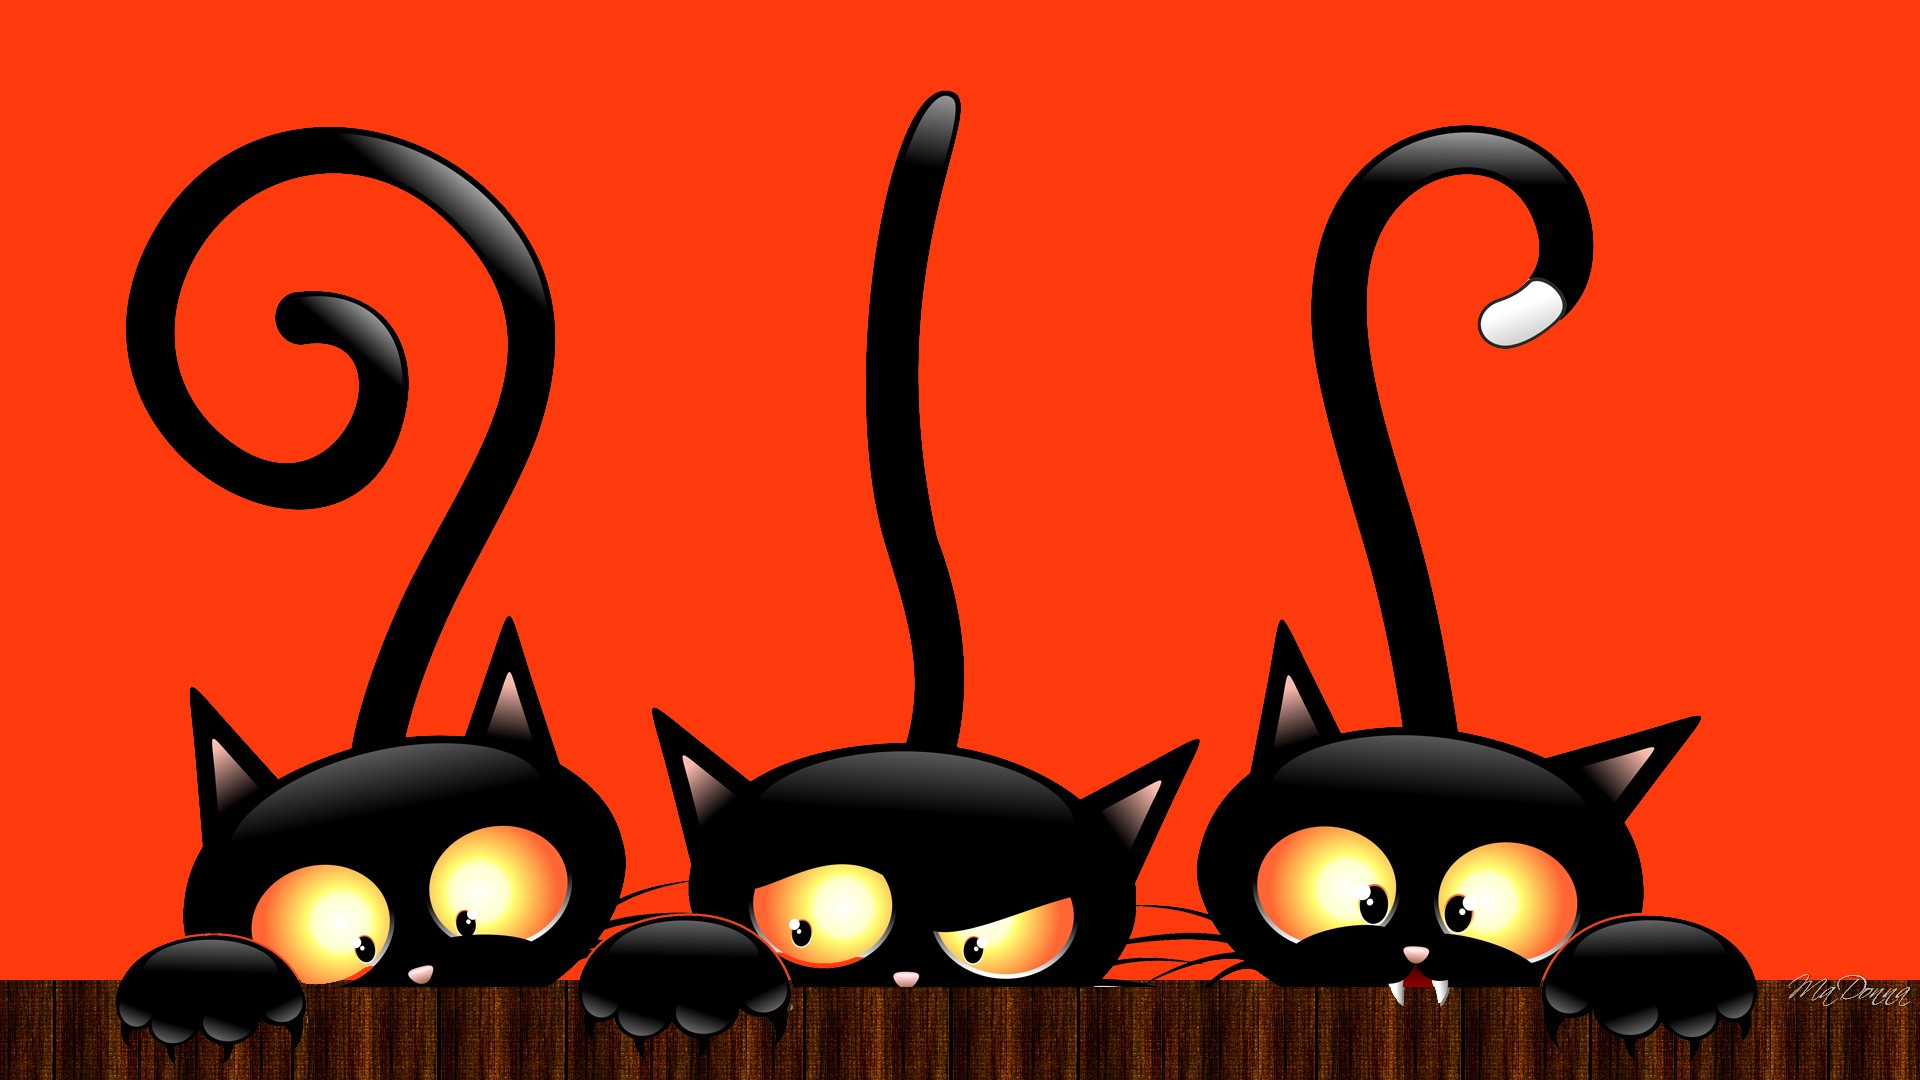 Free Download Scary Halloween Backgrounds 6.